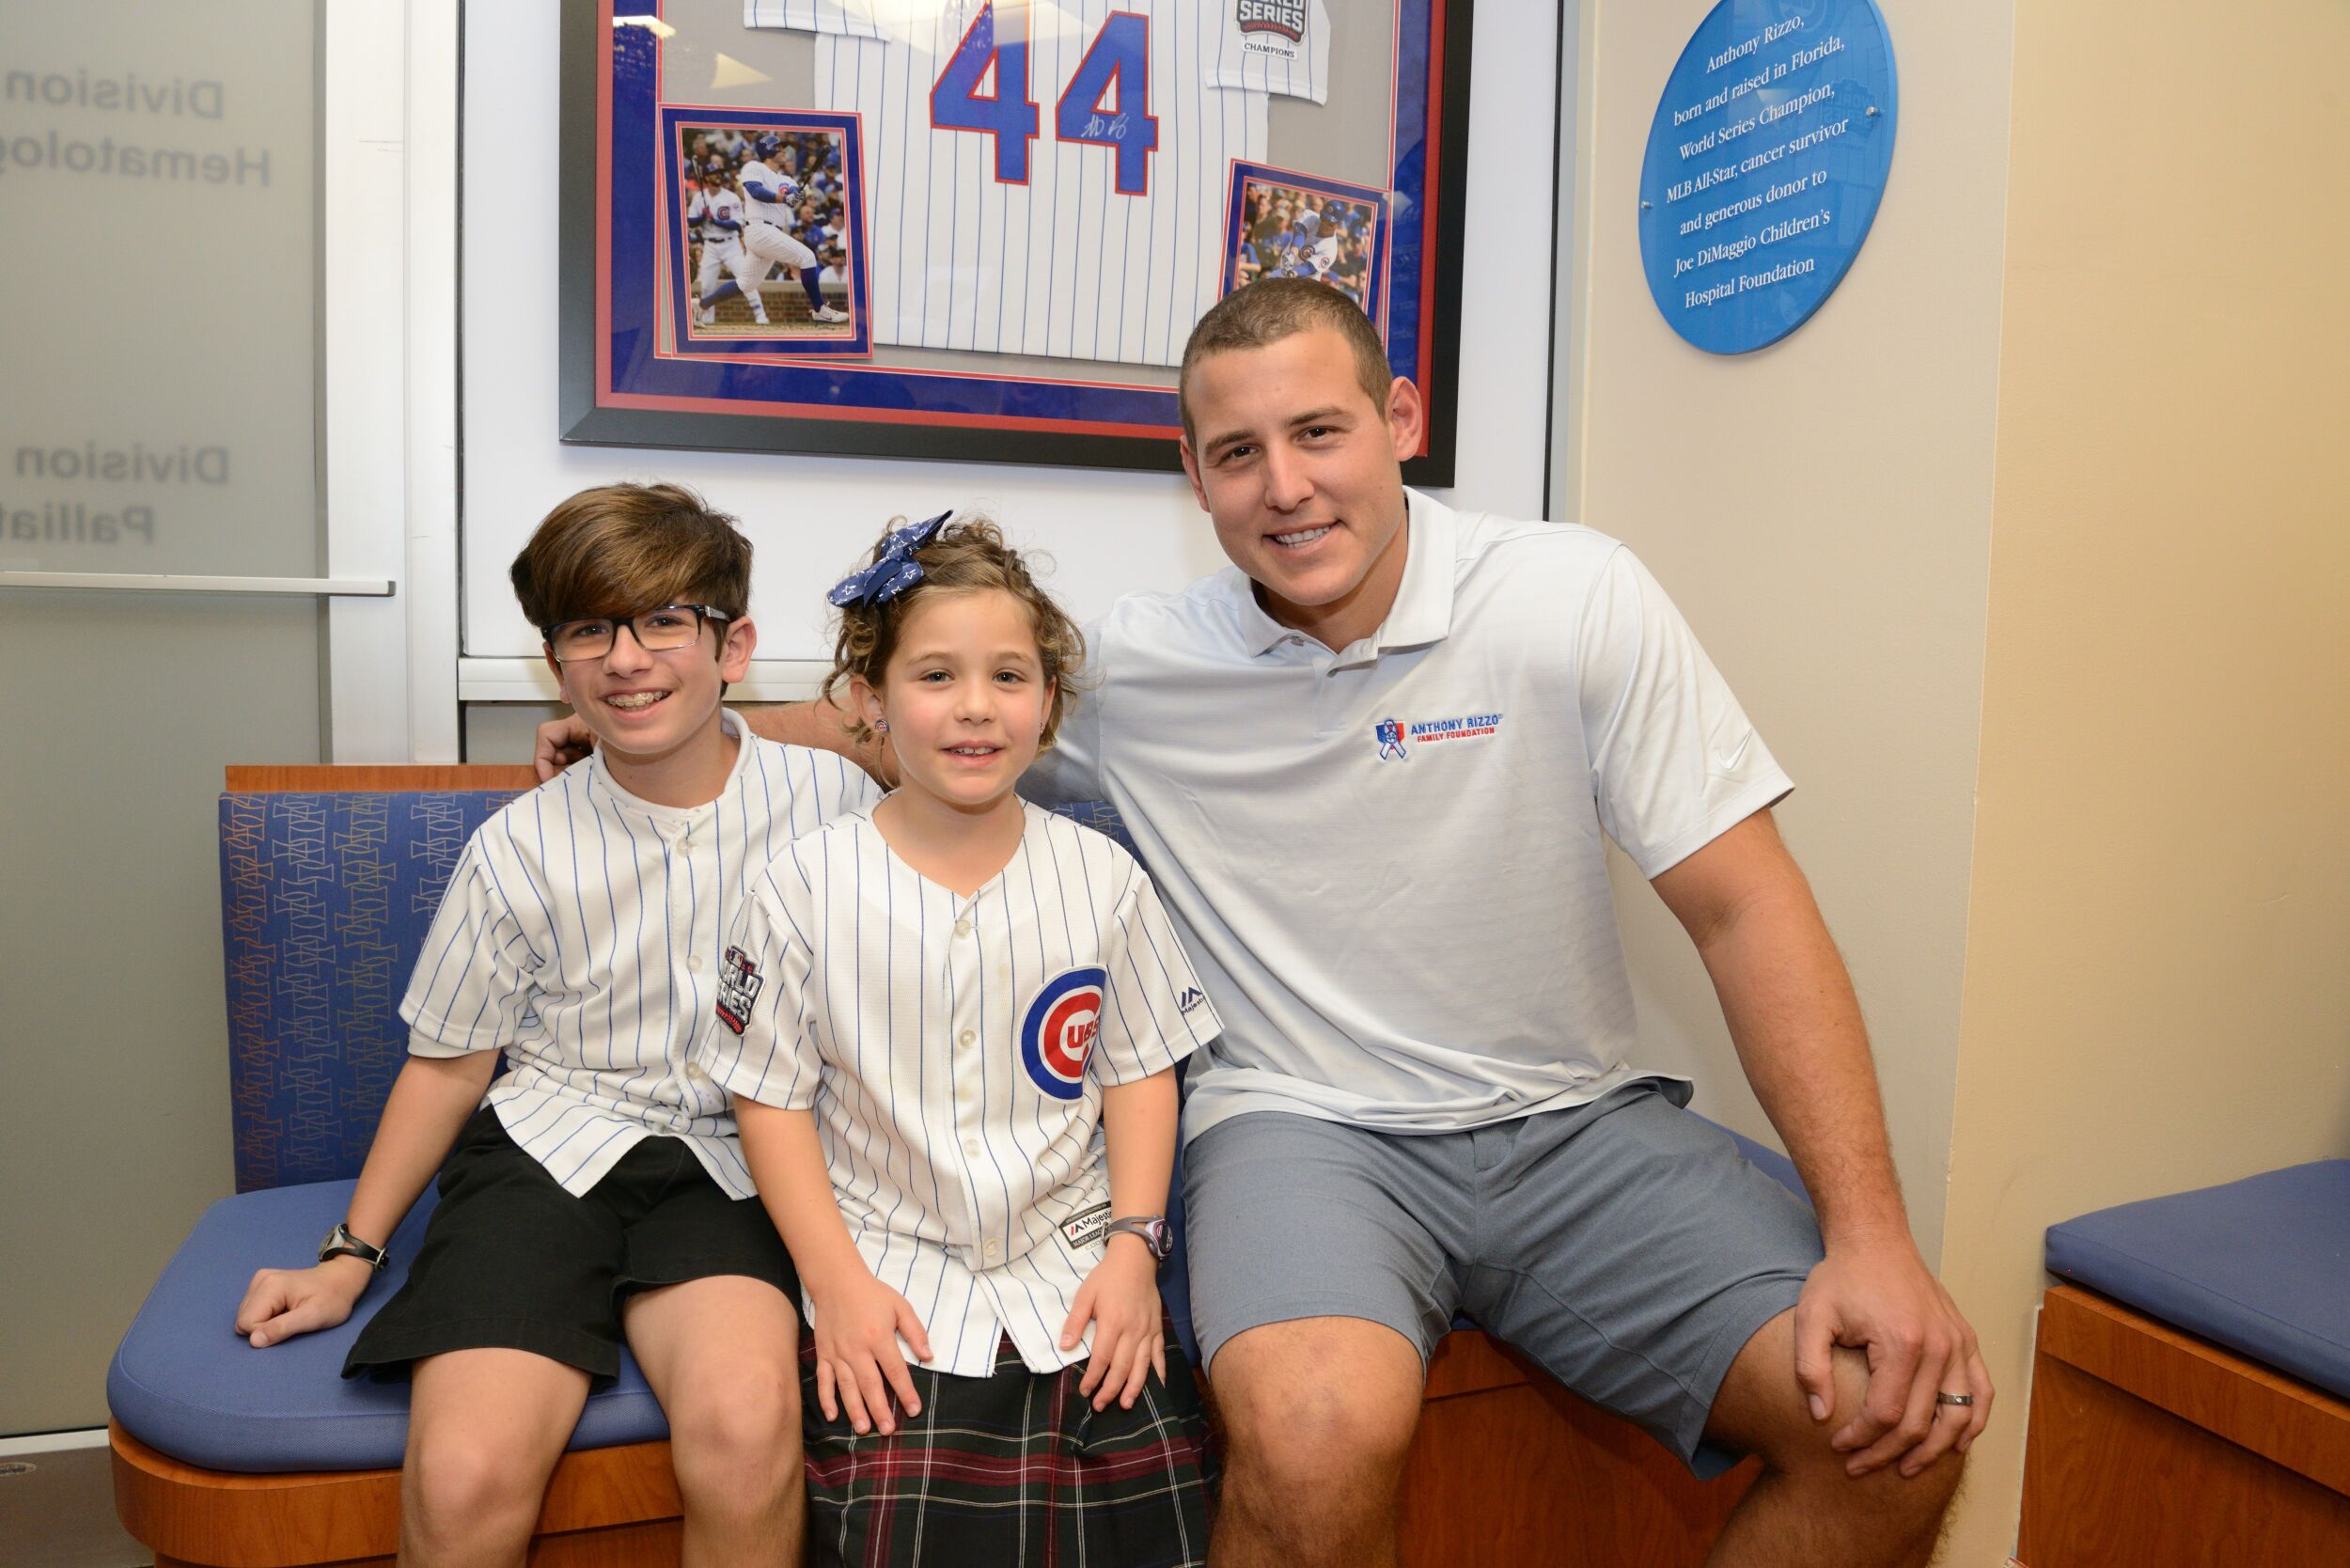 Anthony Rizzo Thanked for 1 million donation, Visits with Cancer